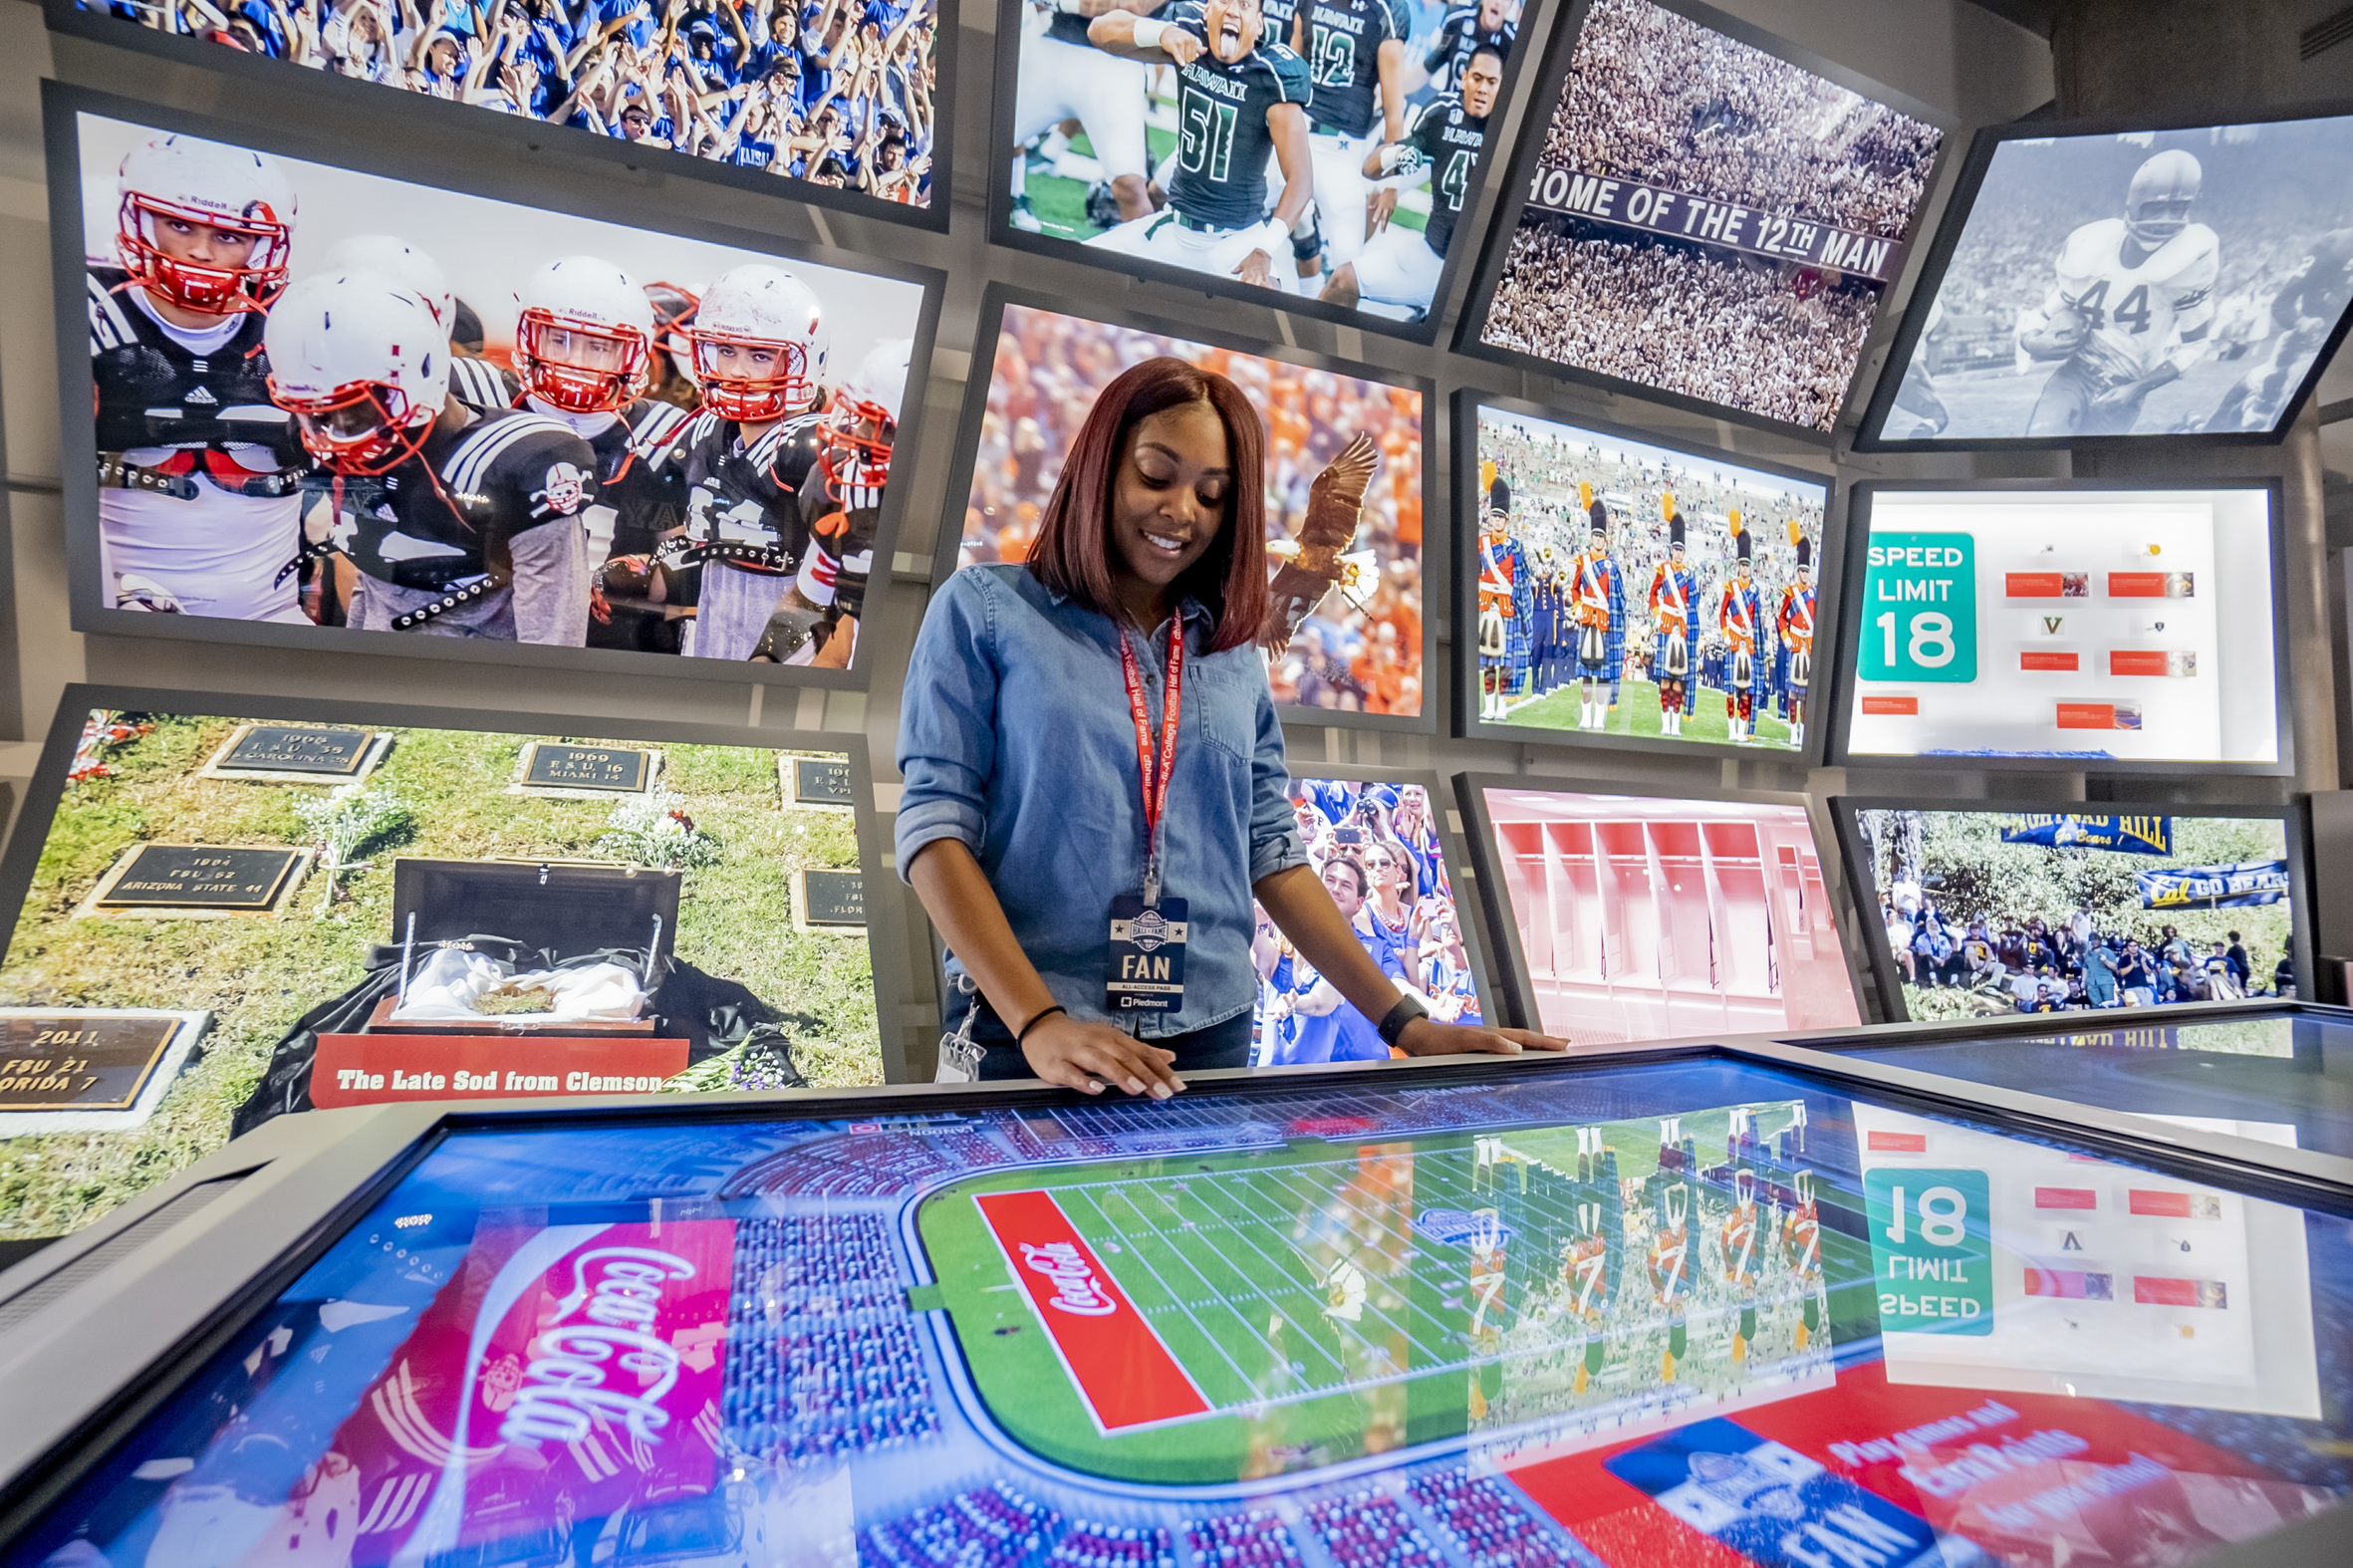 Woman standing in the middle of a room with televisions everywhere with football images.